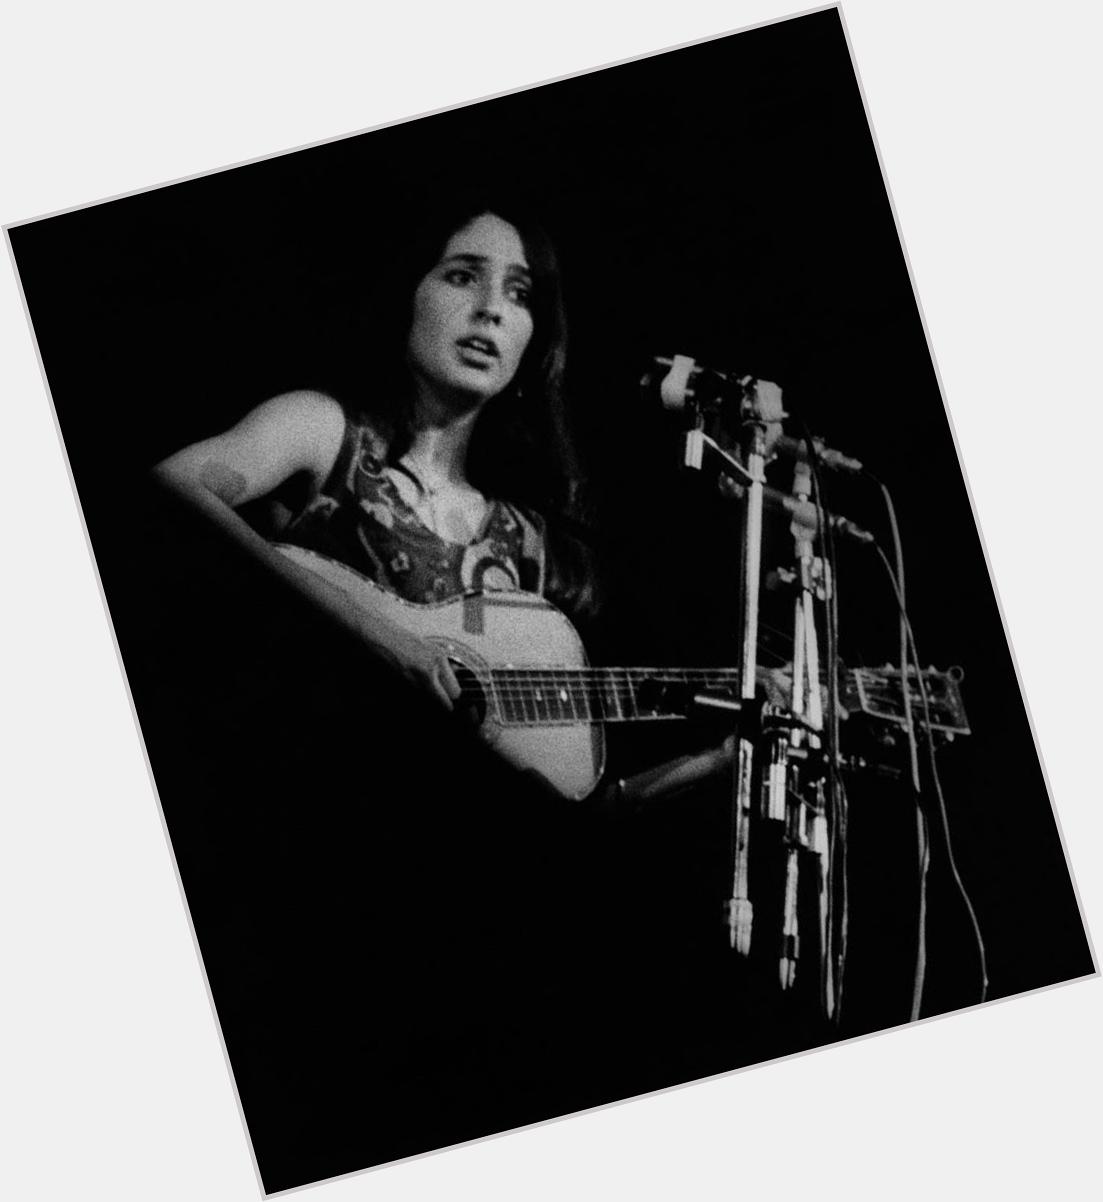 Happy Birthday to Joan Baez who continues to inspire! Thank you for your contributions to music & peace. 